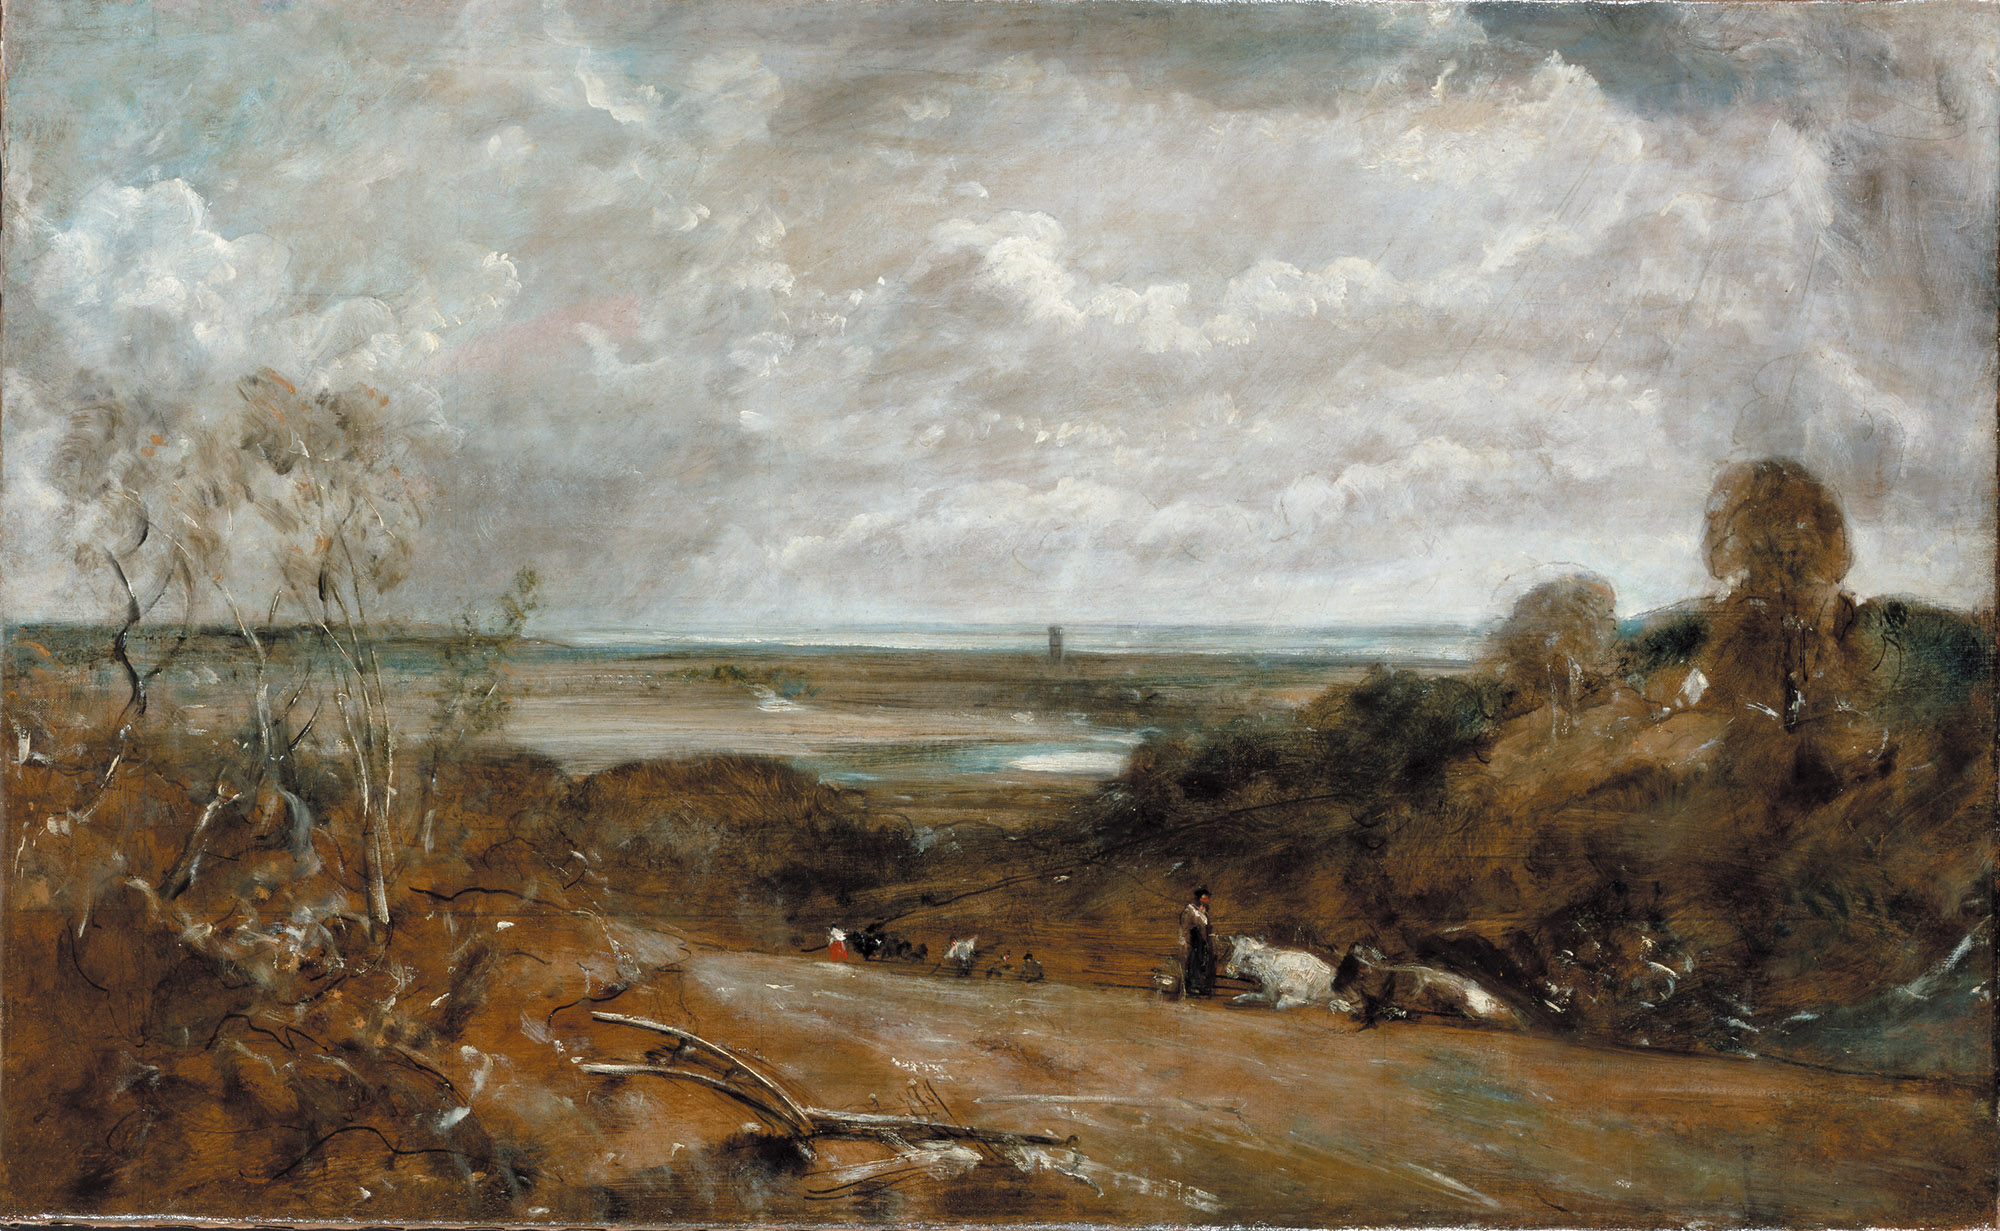 A painting depicting a rural scene in England